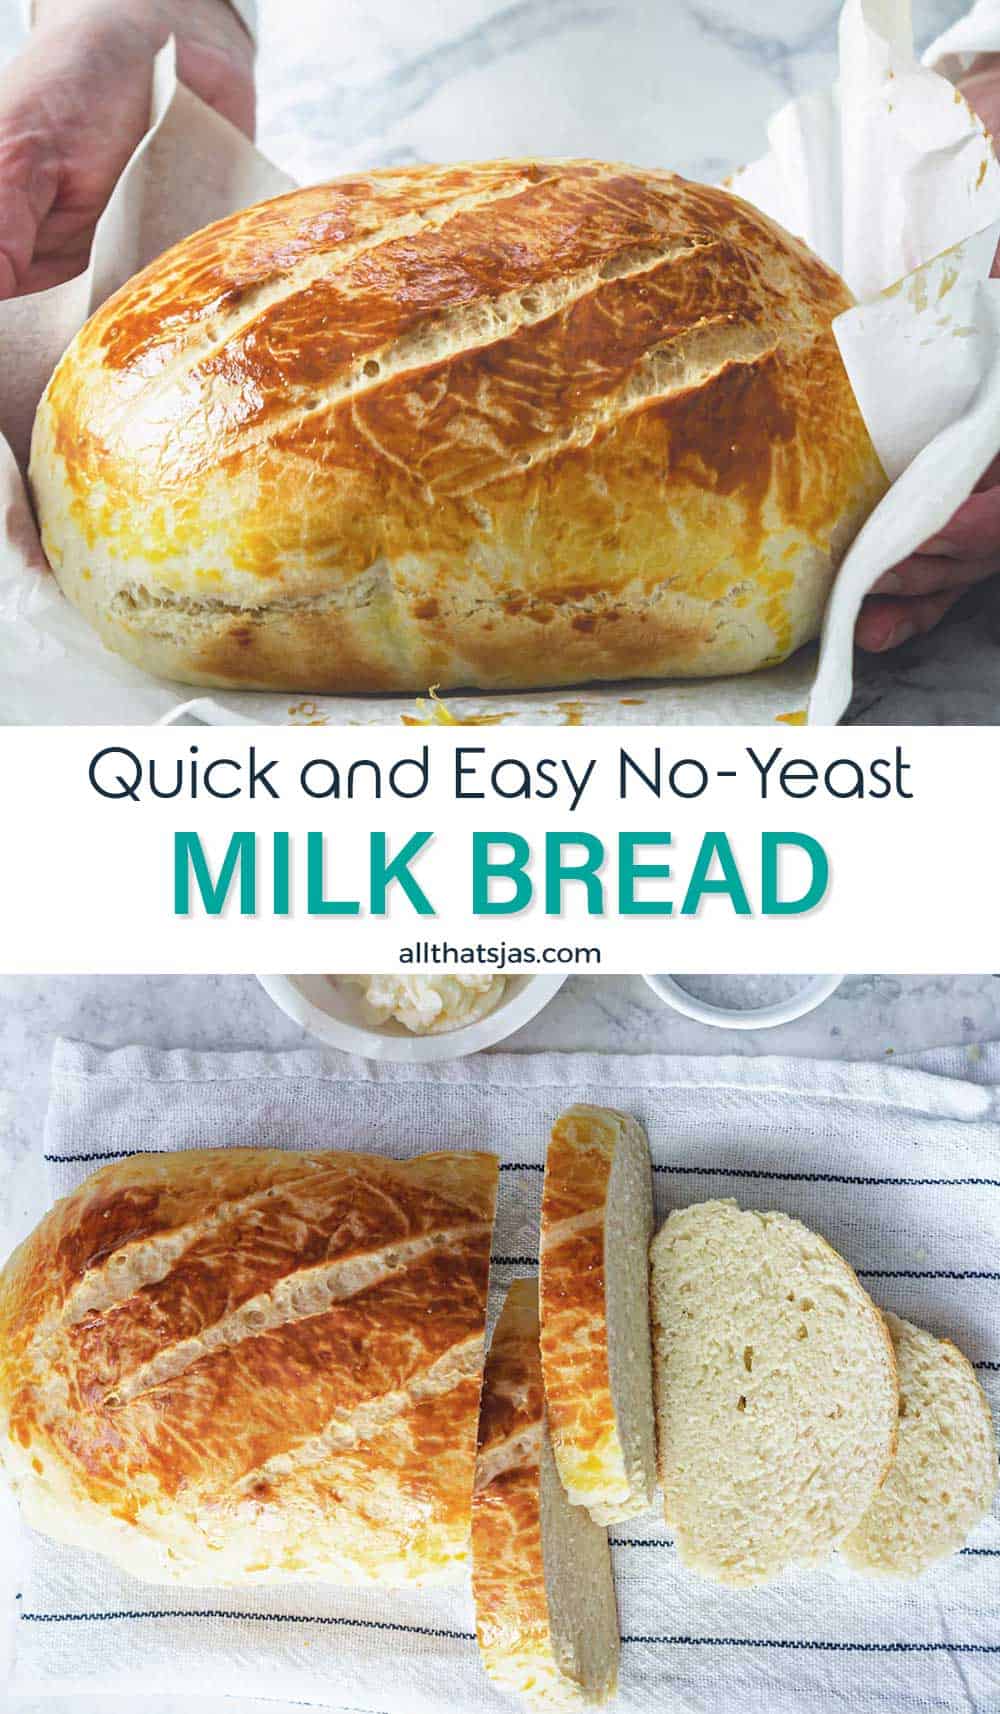 Two photo image of quick and easy no yeast loaf with text overlay in the middle.